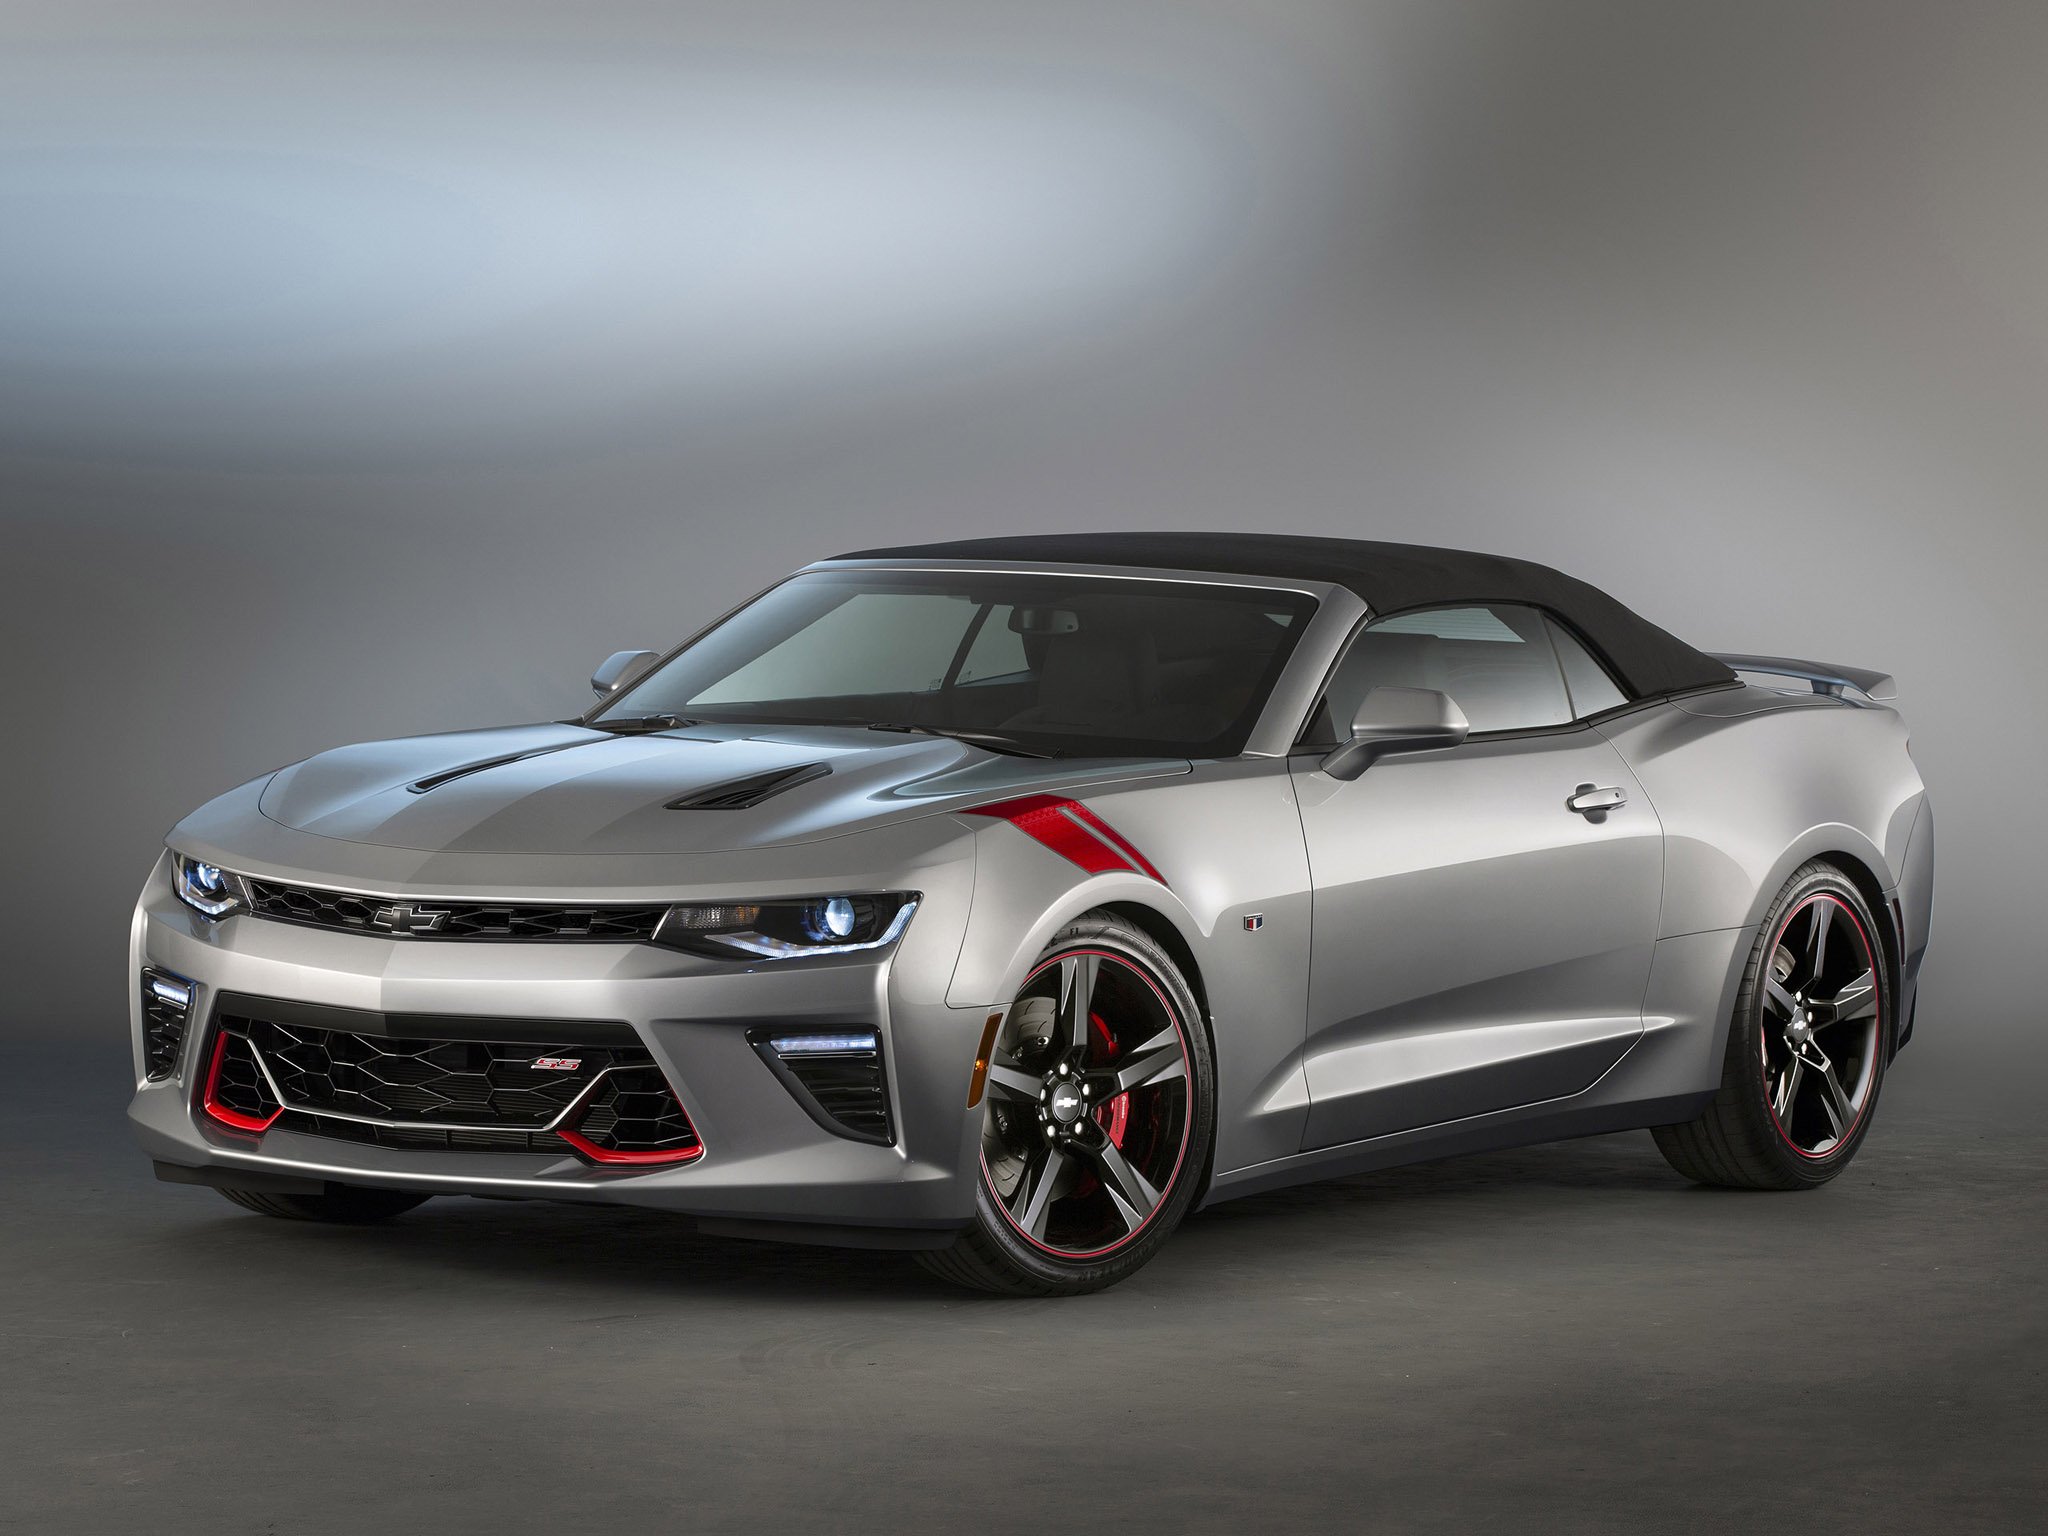 2015, Chevrolet, Camaro, S s, Convertible, Red, Accent, Package, Concept, Muscle Wallpaper